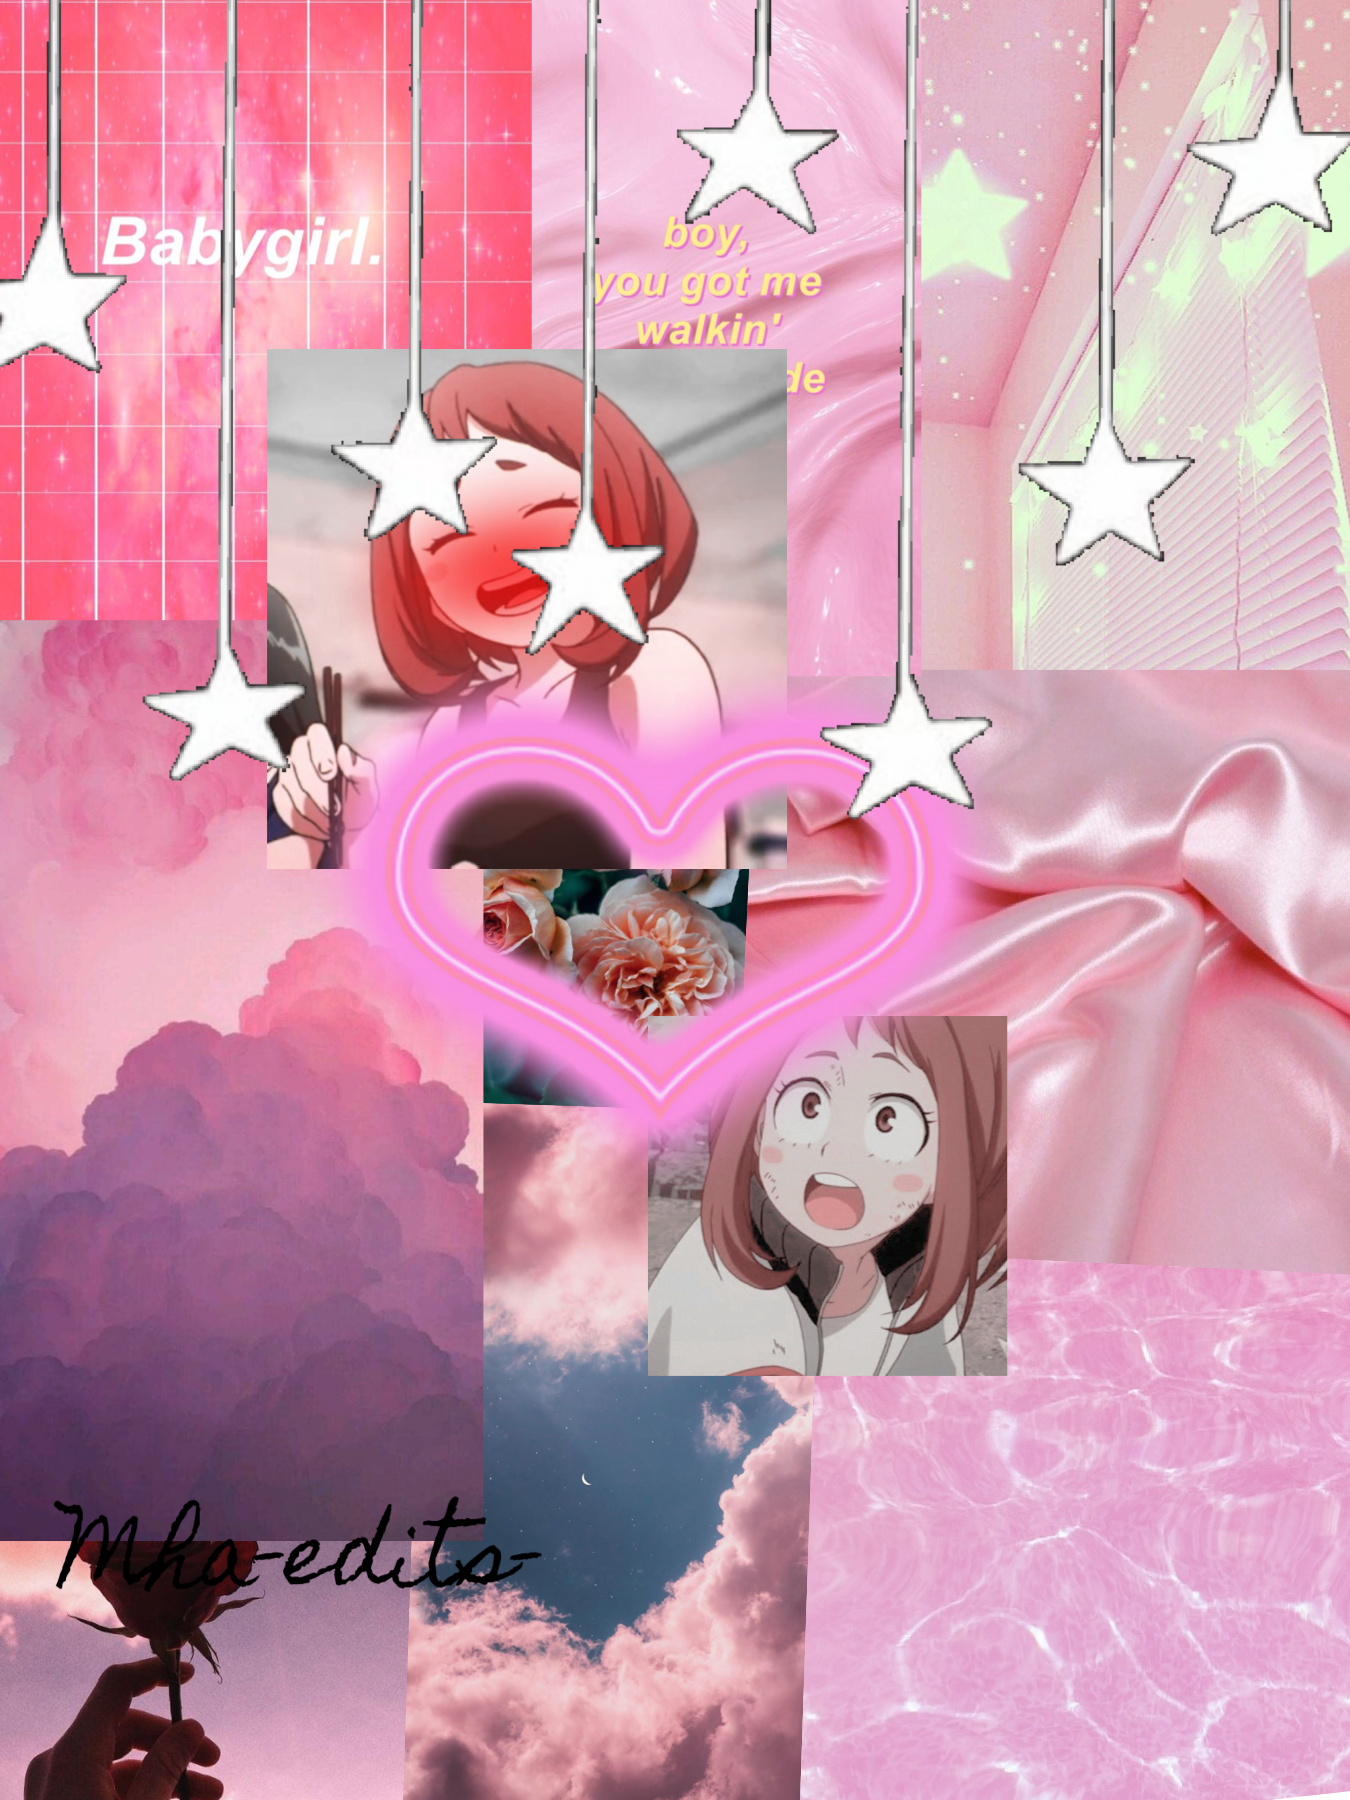 (💗tap⭐️)

Ochako edit 😚👏🏻
Love this girl 
This one took me a while I didn’t know 
How to style it 🤡